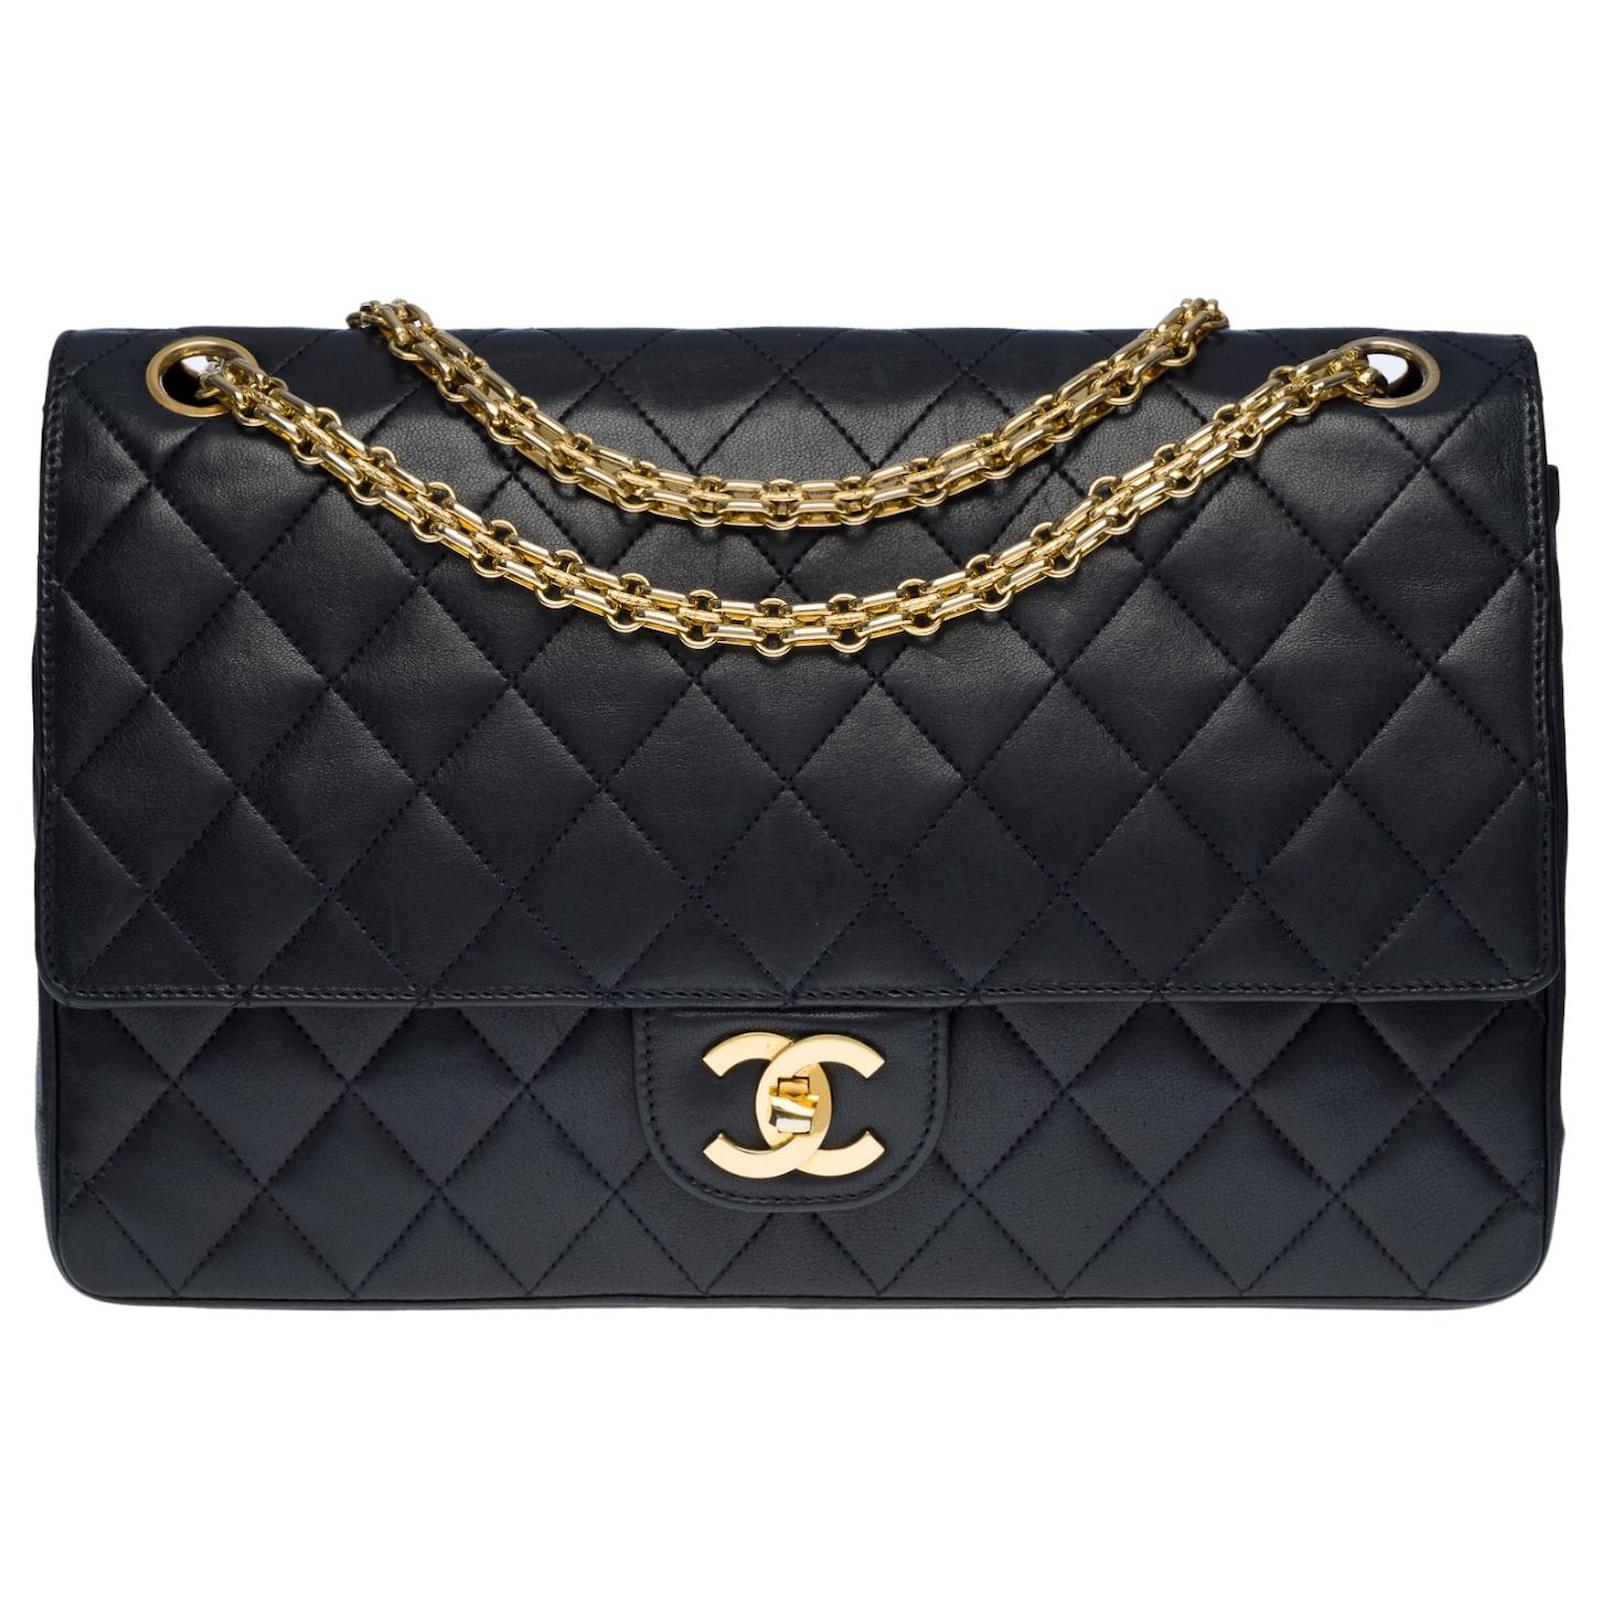 Beautiful Chanel Timeless/Classic handbag 27cm with lined flap in navy ...